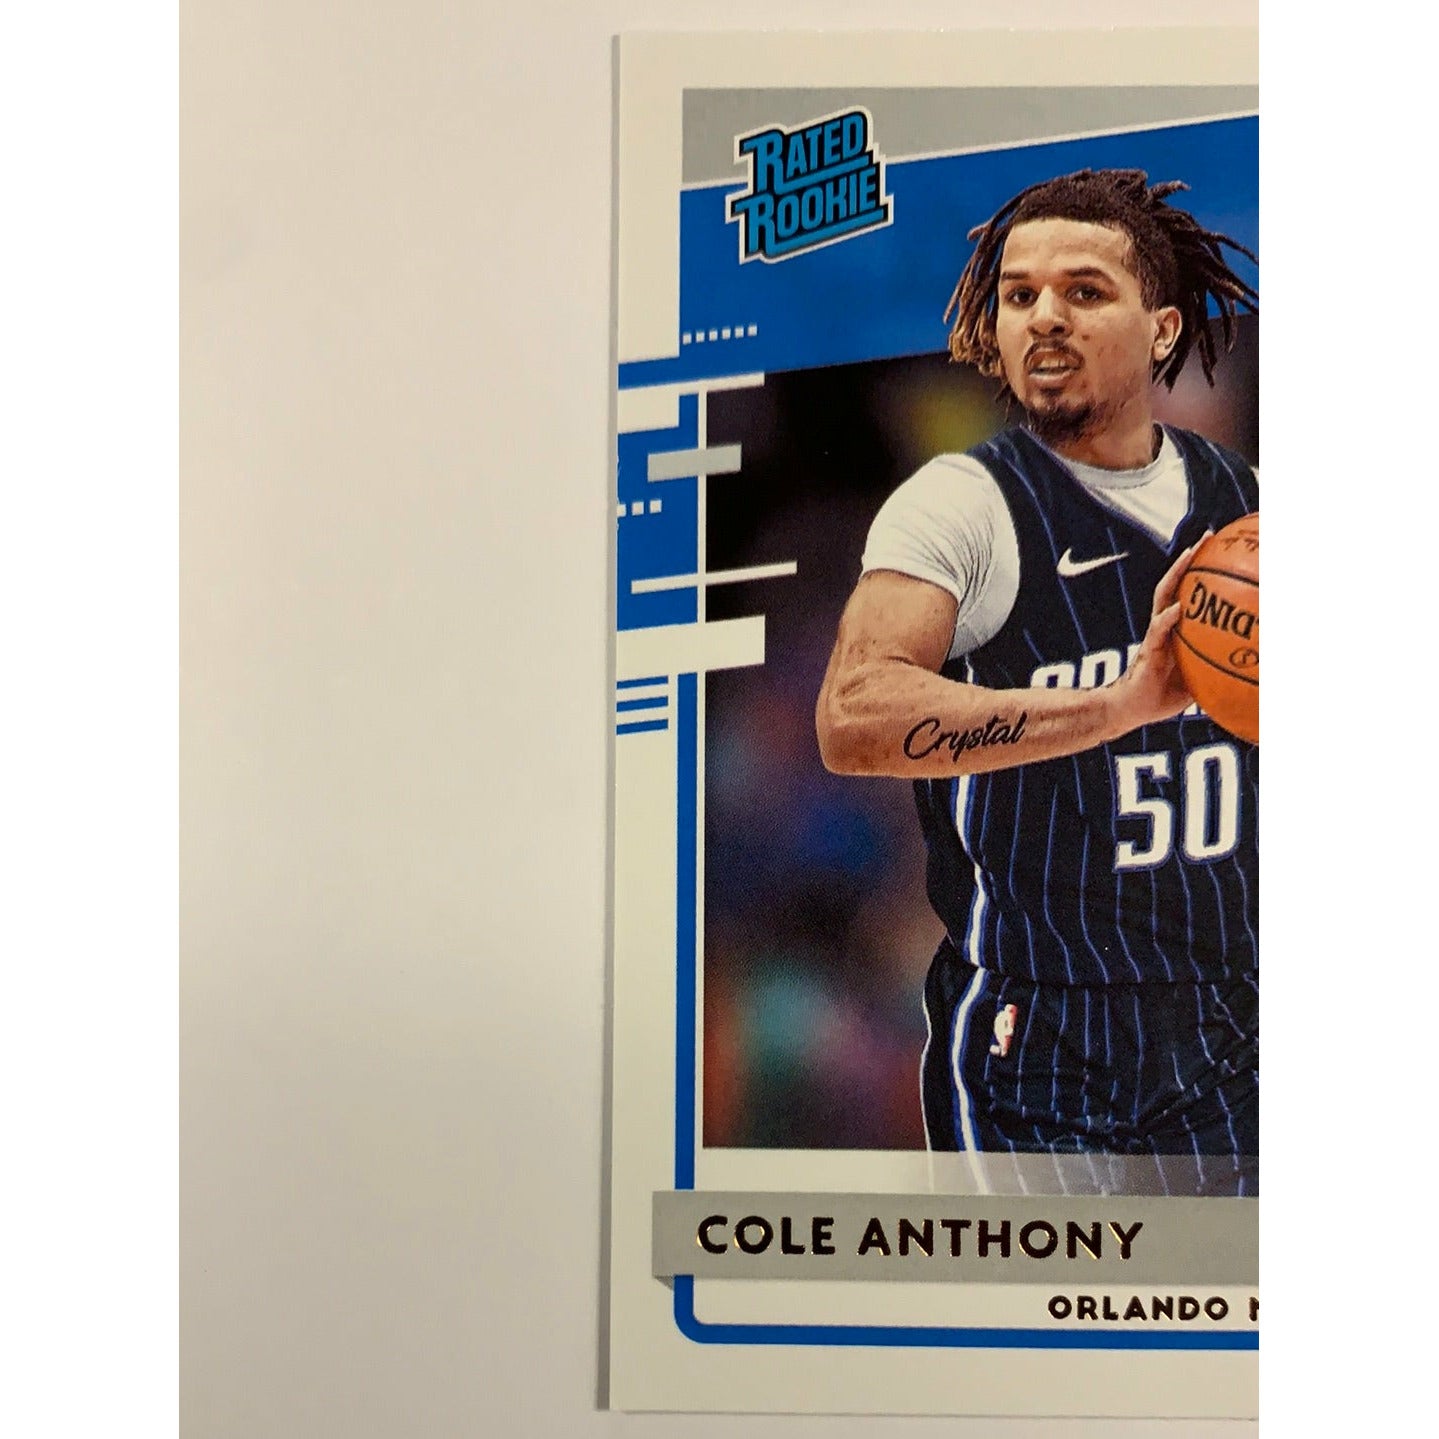  2020-21 Donruss Cole Anthony Rated Rookie  Local Legends Cards & Collectibles